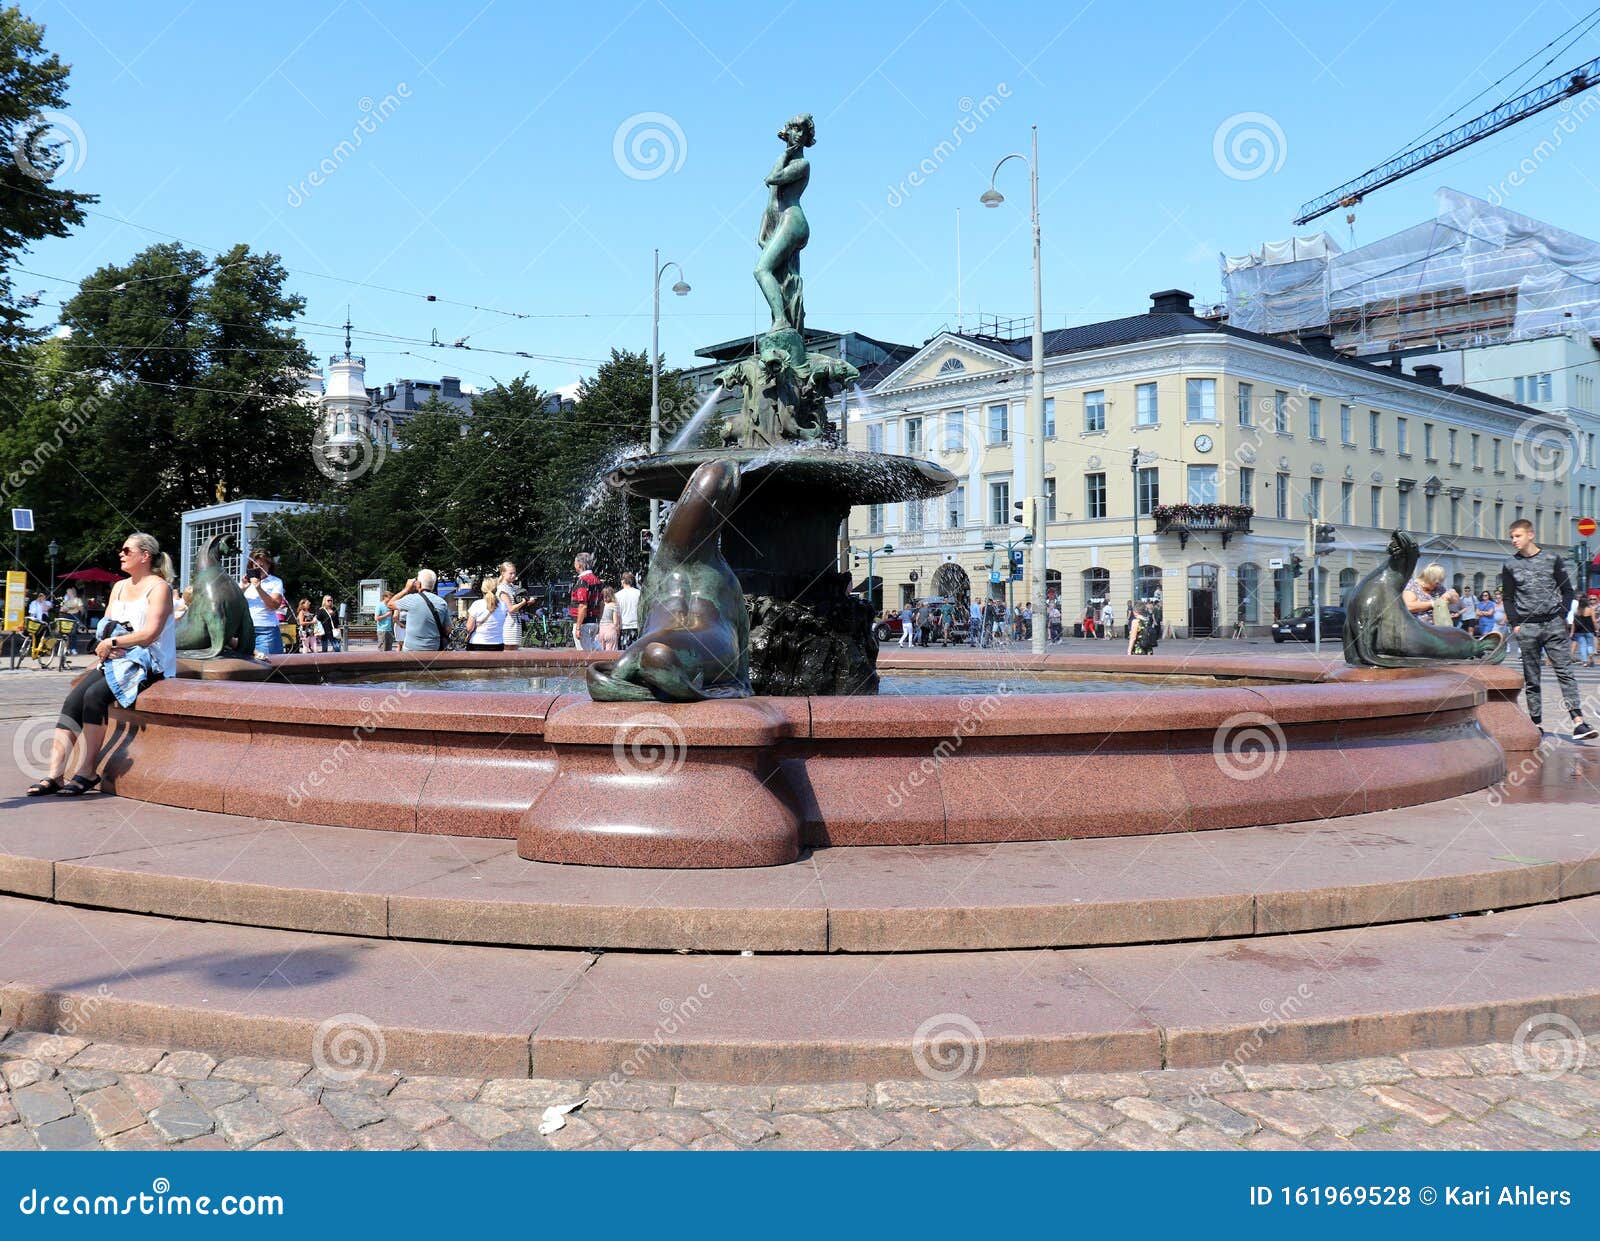 Crowded Day at the Havis Amanda Statue in Helsinki, Finland Editorial ...